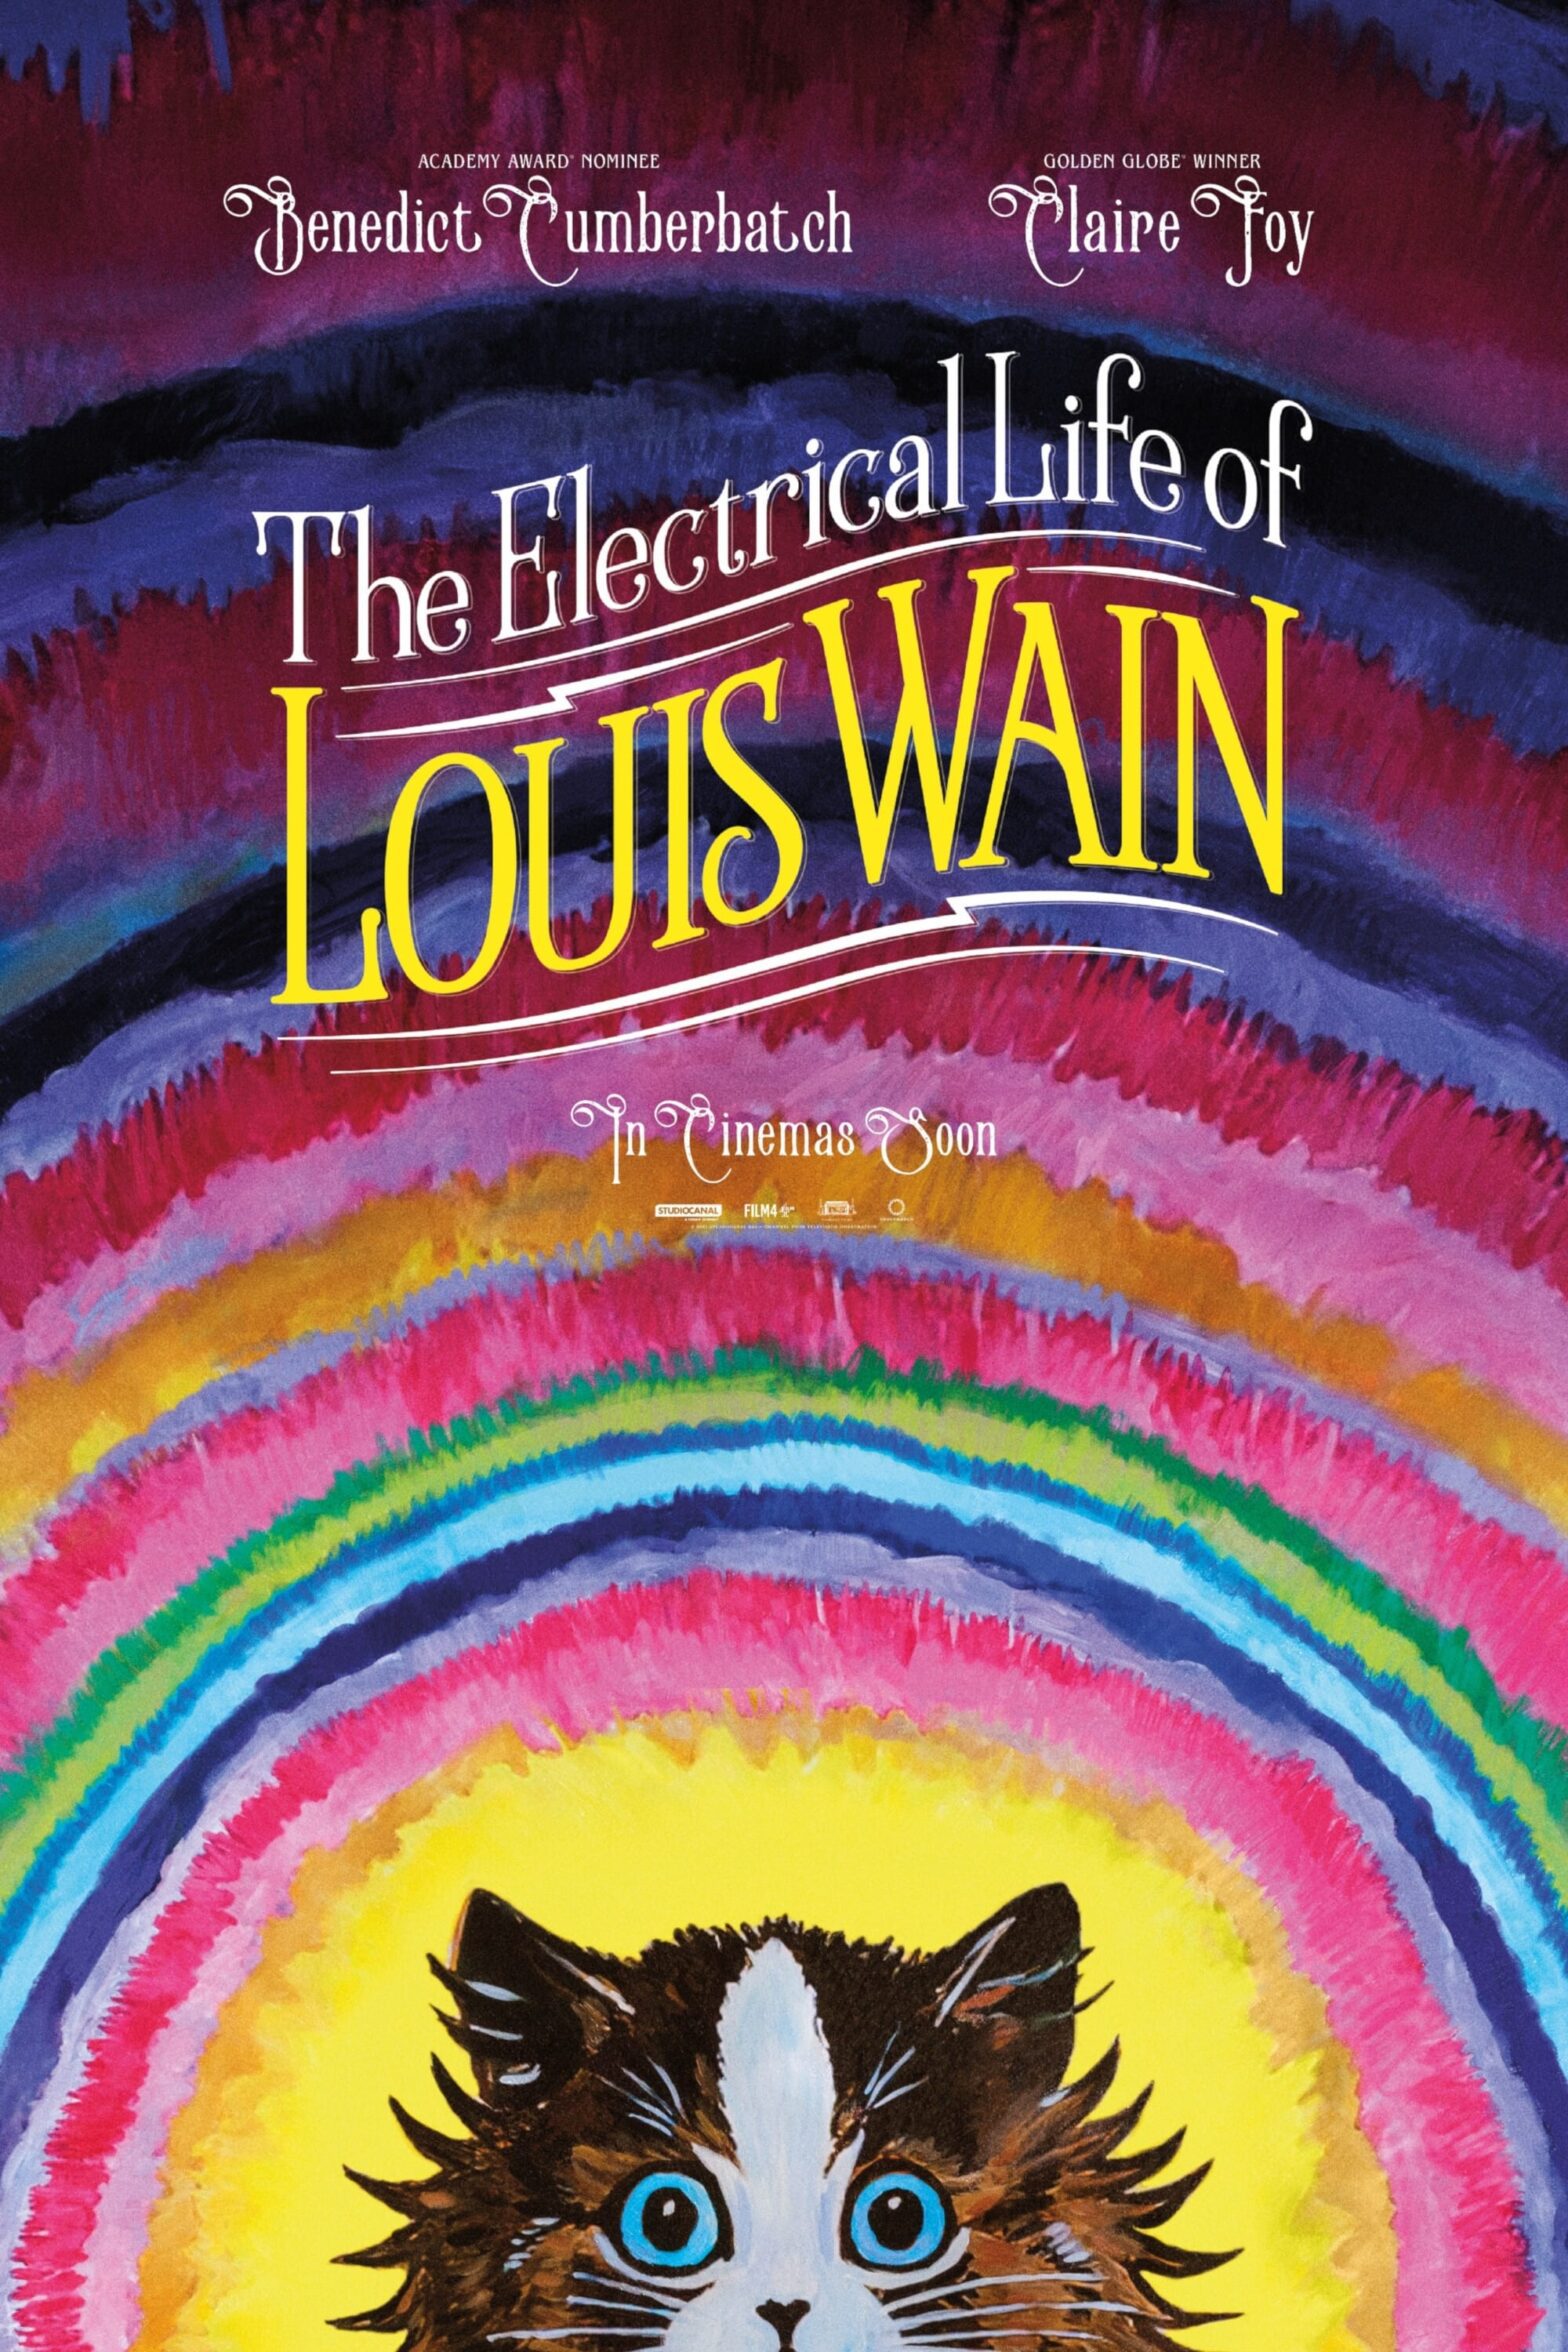 Poster for the movie "The Electrical Life of Louis Wain"